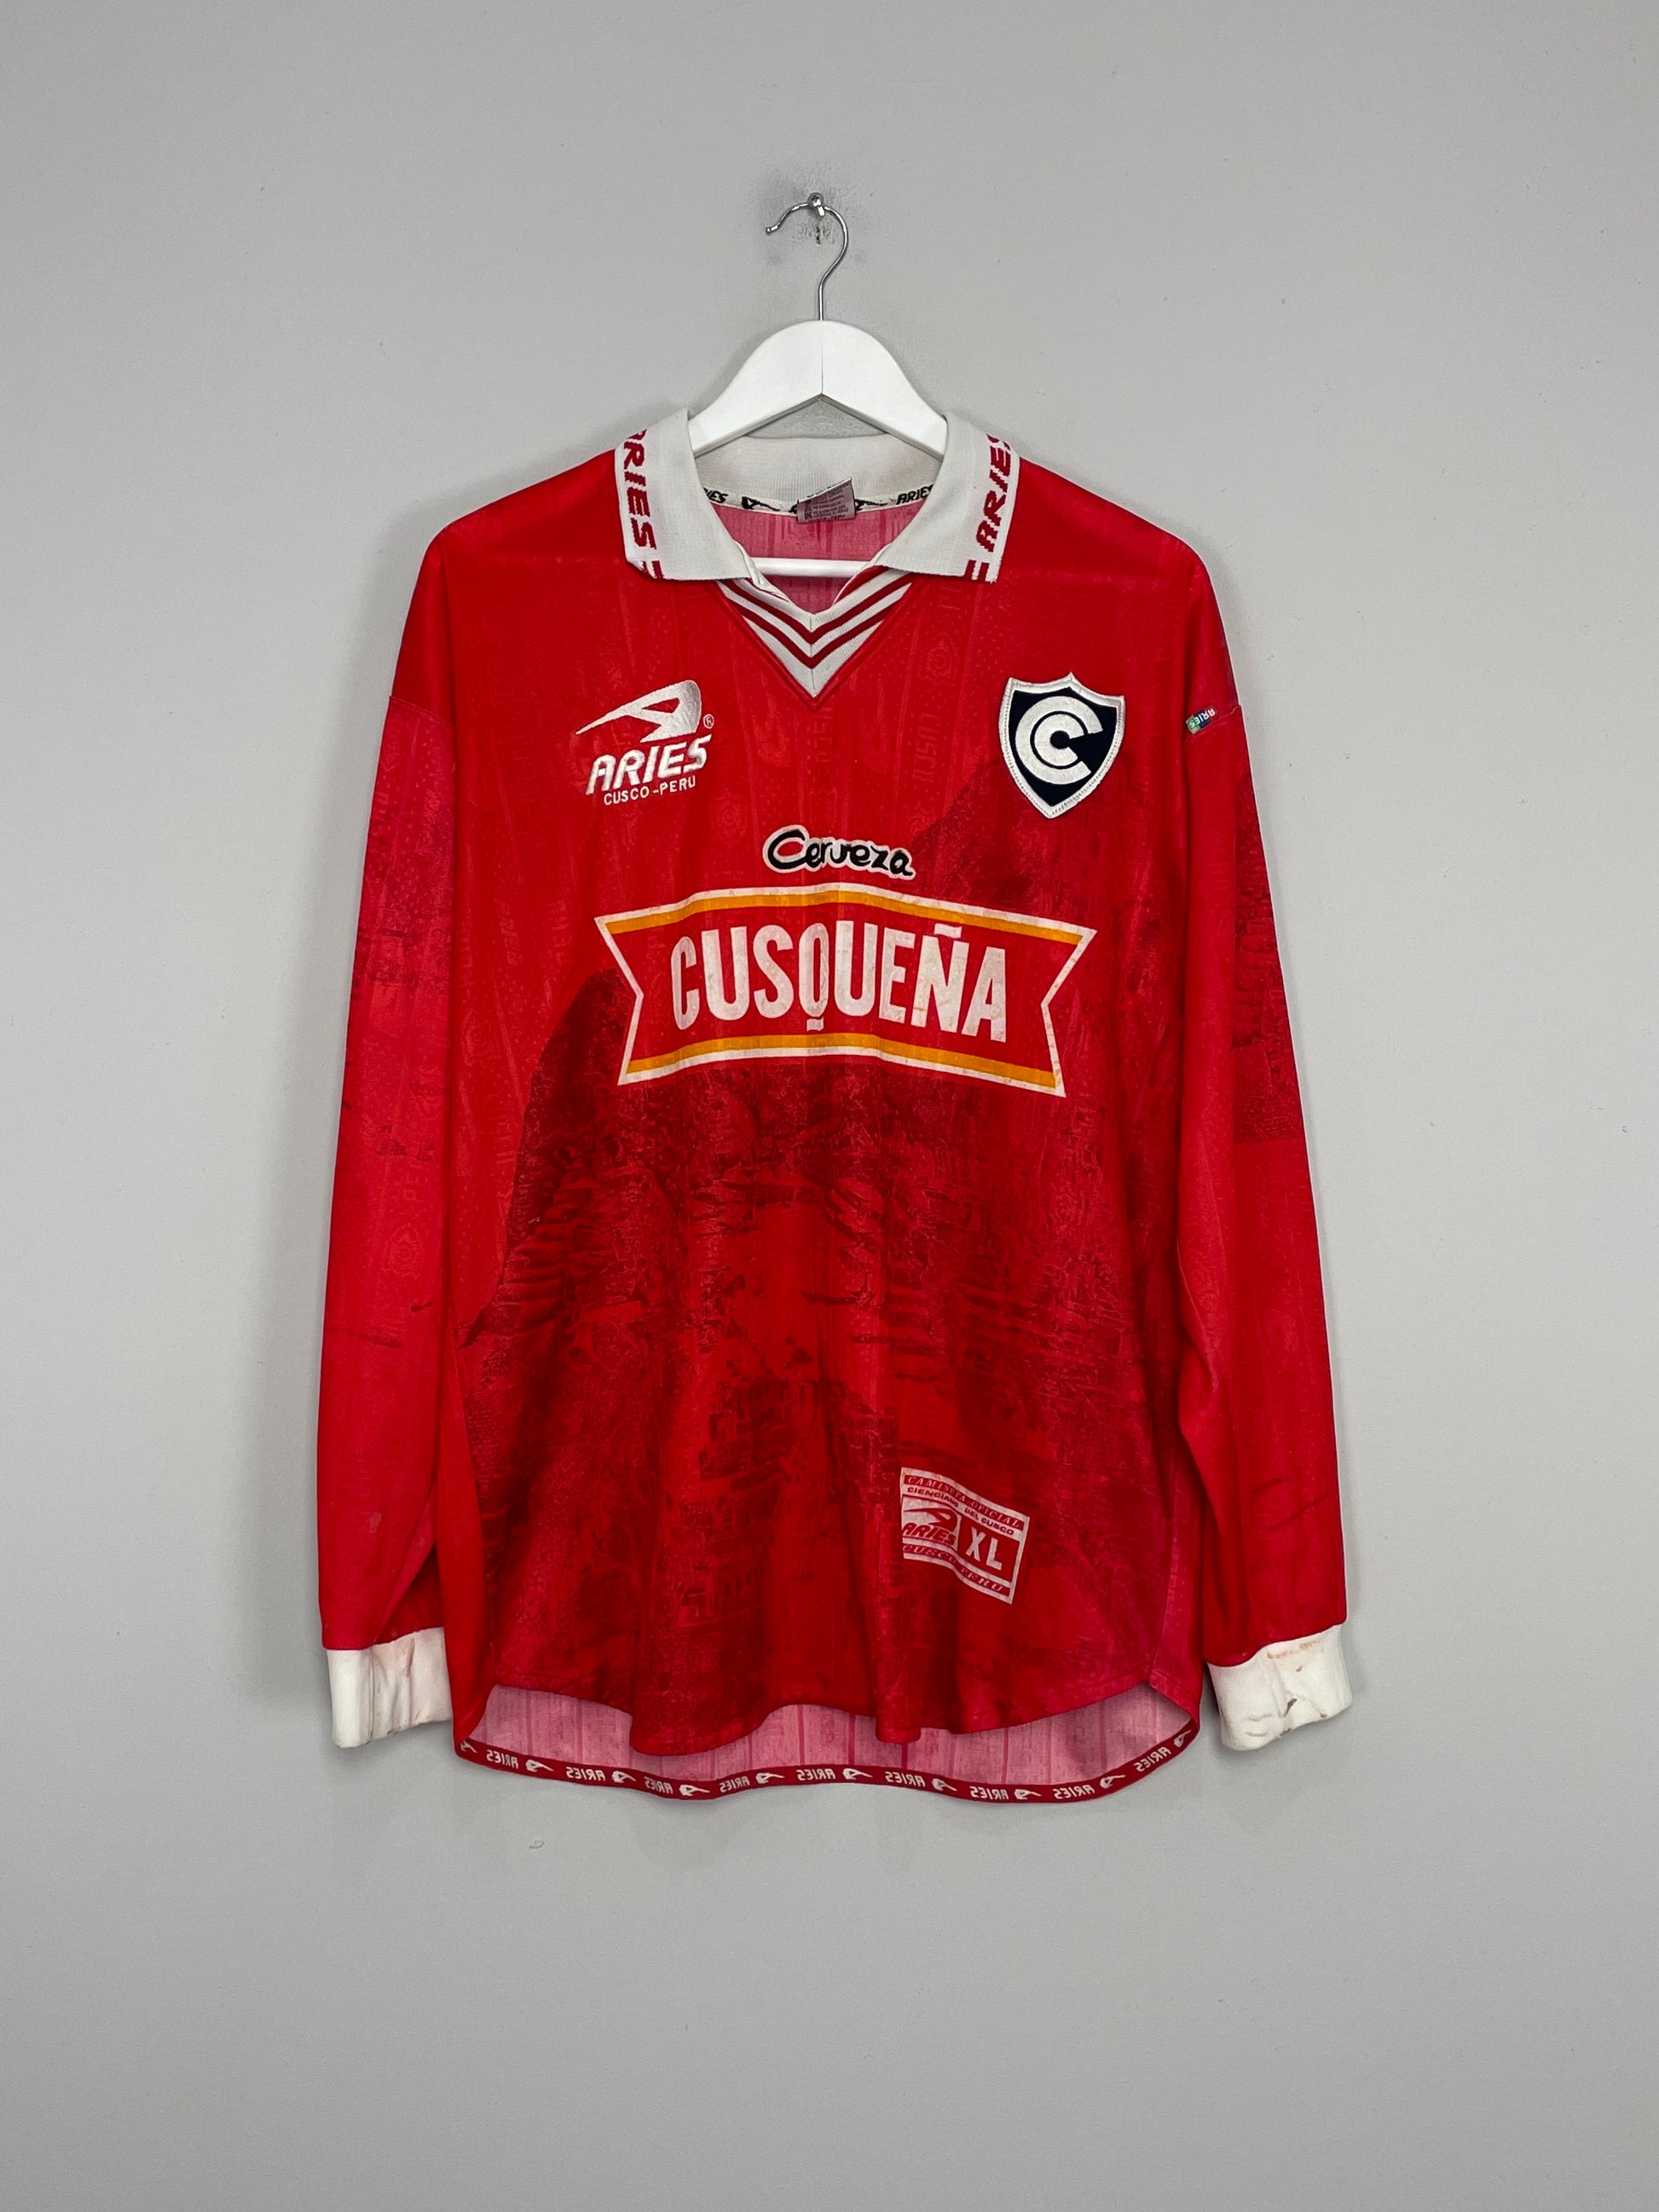 Image of the Club Cienciano shirt from the 1999/00 season